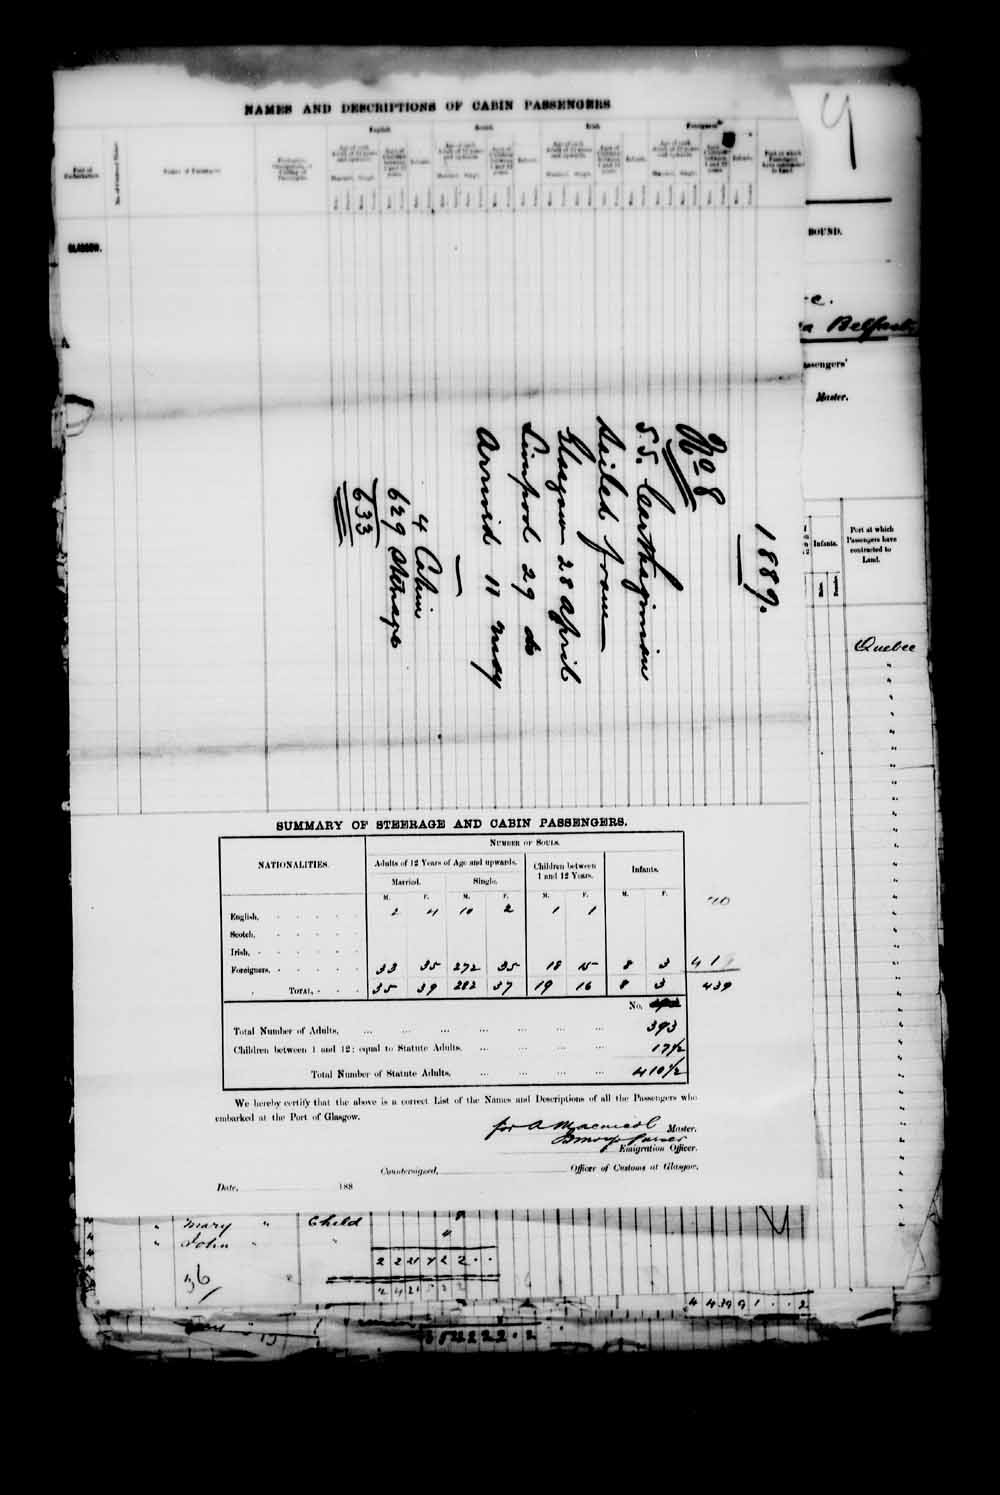 Digitized page of Passenger Lists for Image No.: e003546741